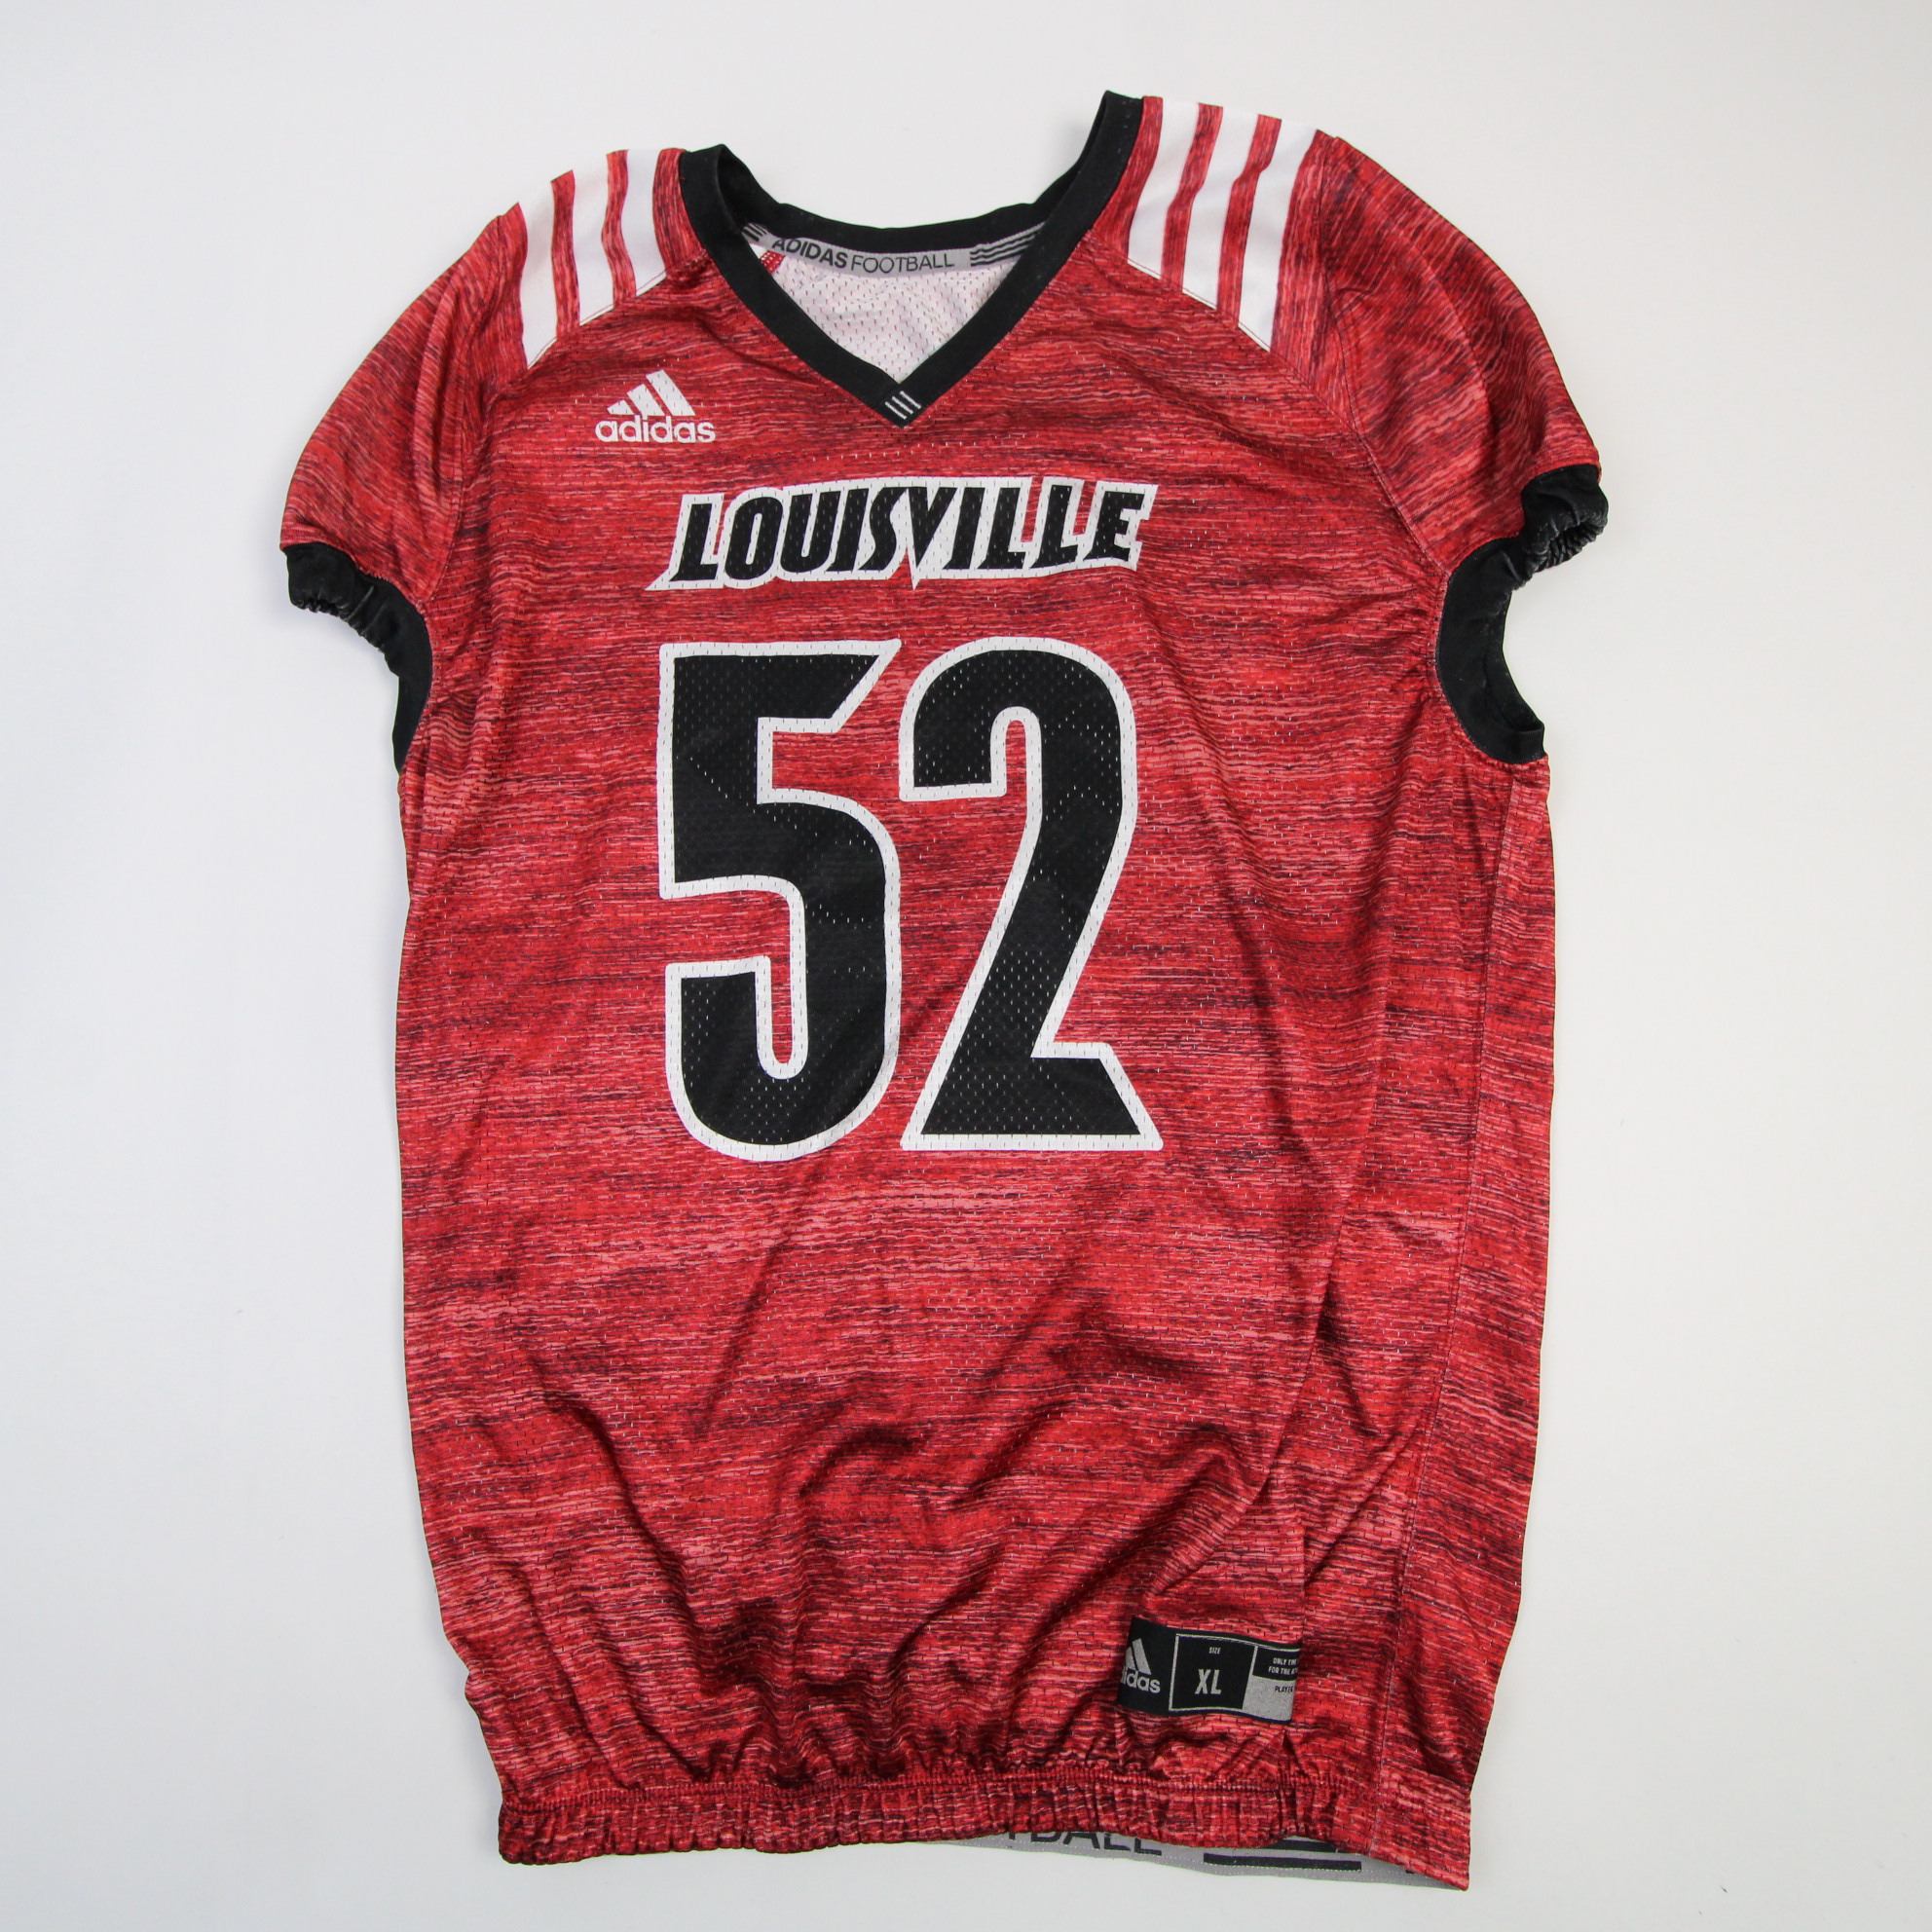 Louisville Cardinals adidas Practice Jersey - Football Men's Red Used S